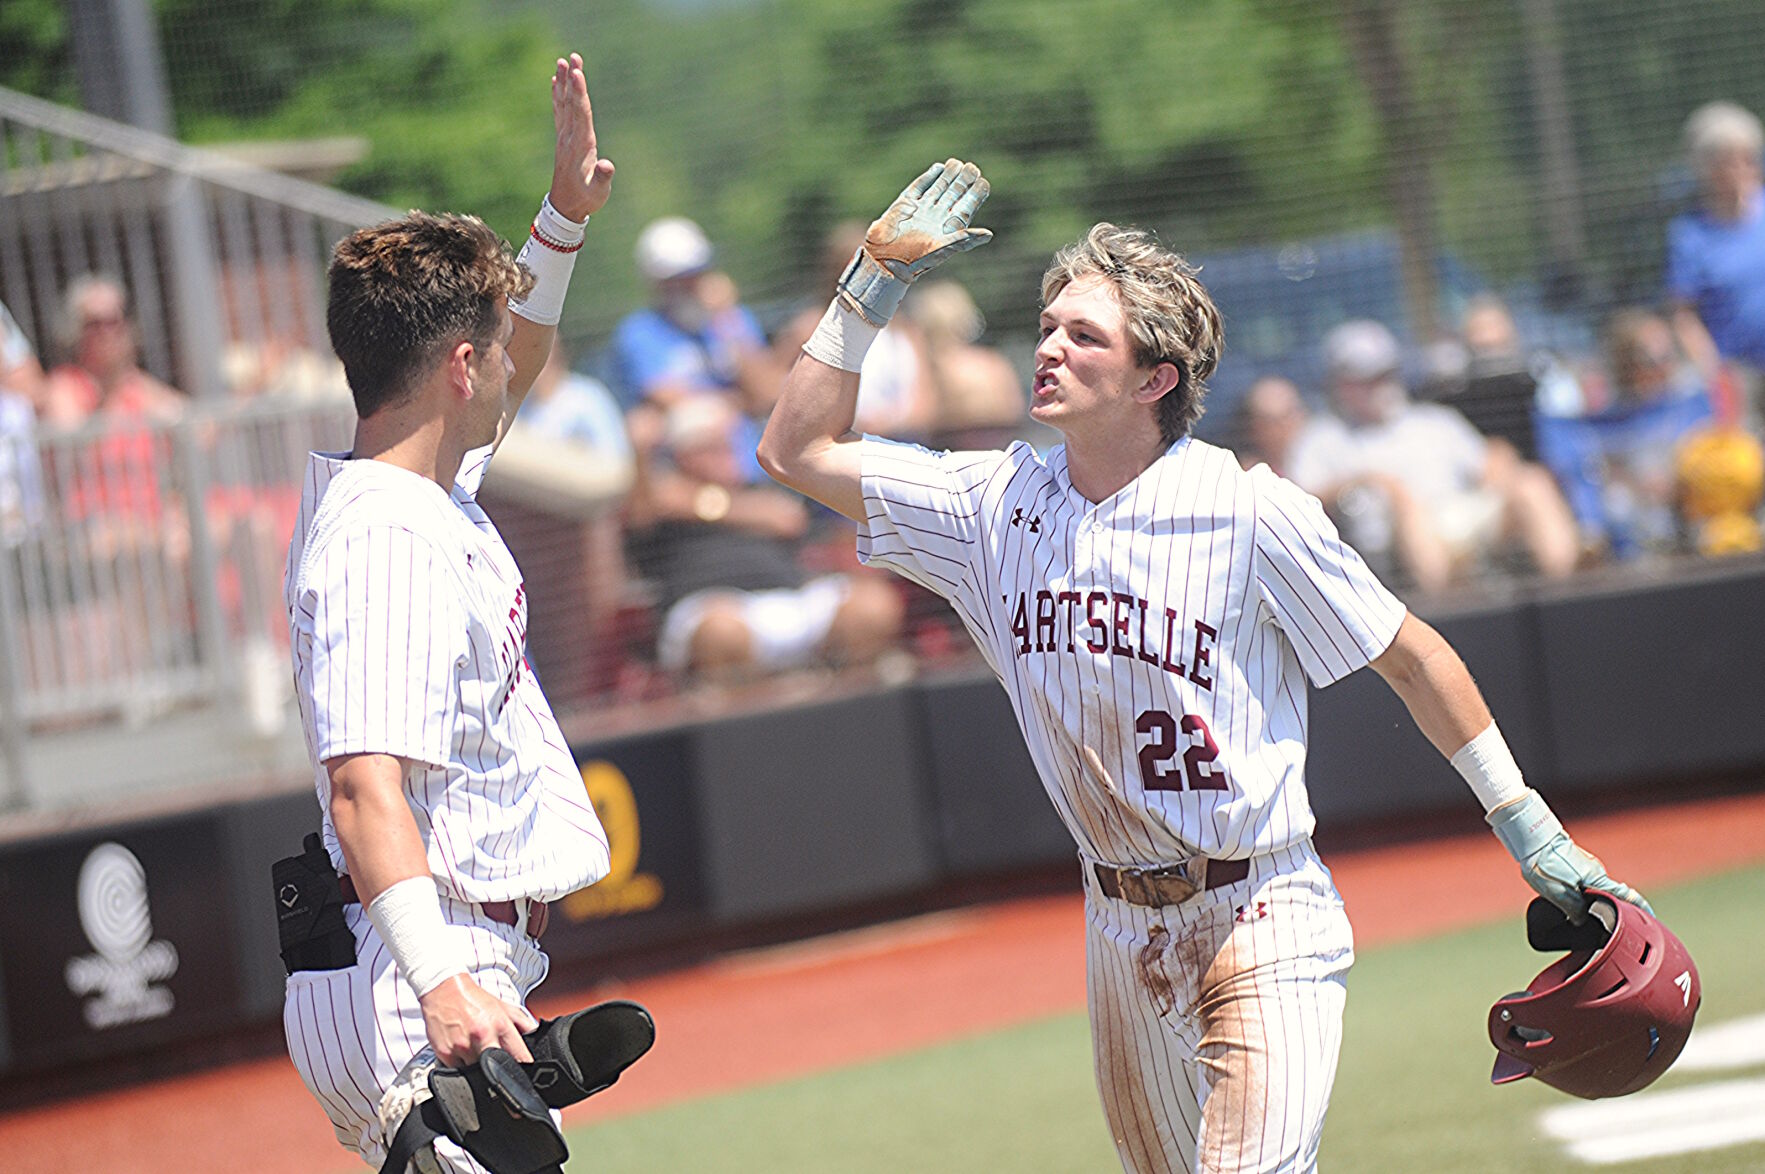 Hartselle Tigers Look to Rebound in Game 2 for 10th State Championship Win